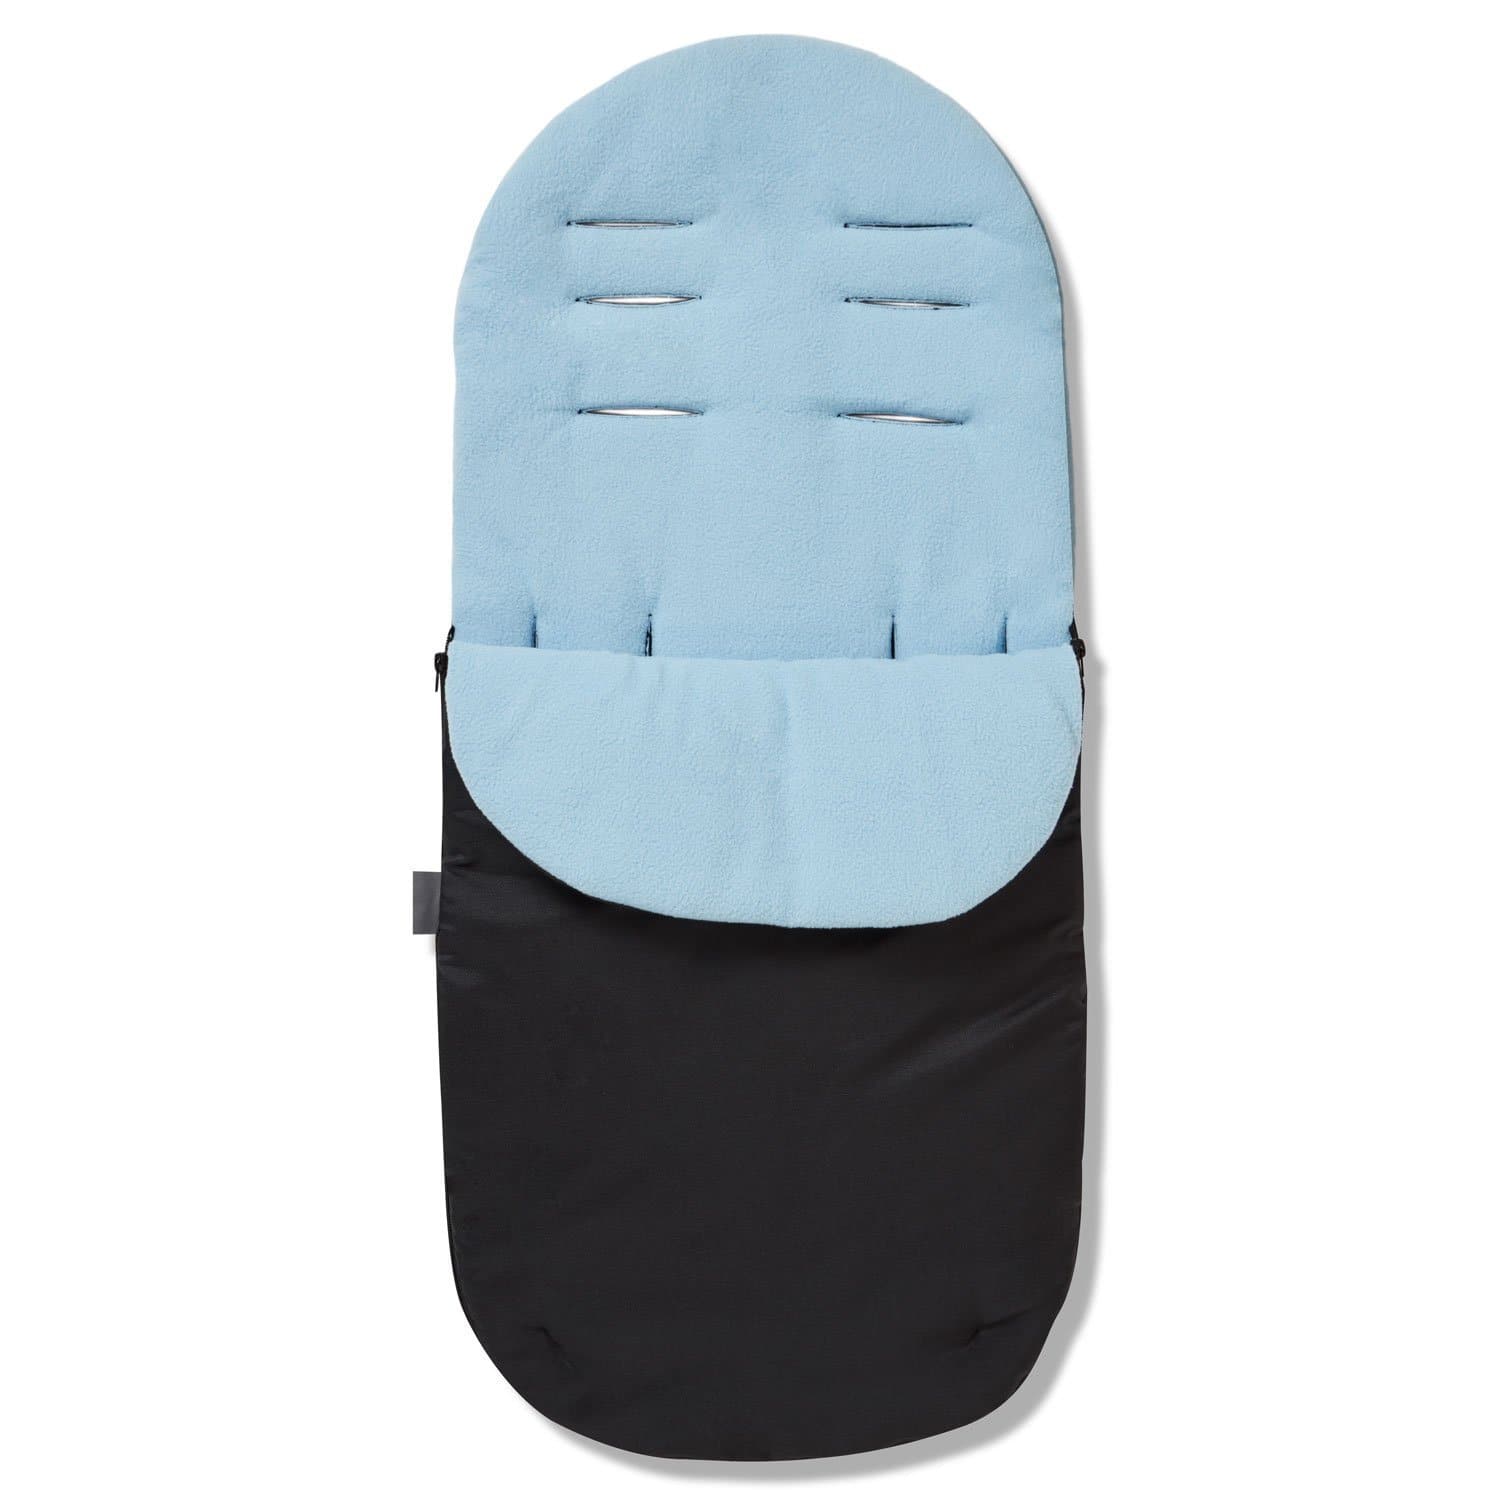 Footmuff / Cosy Toes Compatible with ABC Design - Light Blue / Fits All Models | For Your Little One